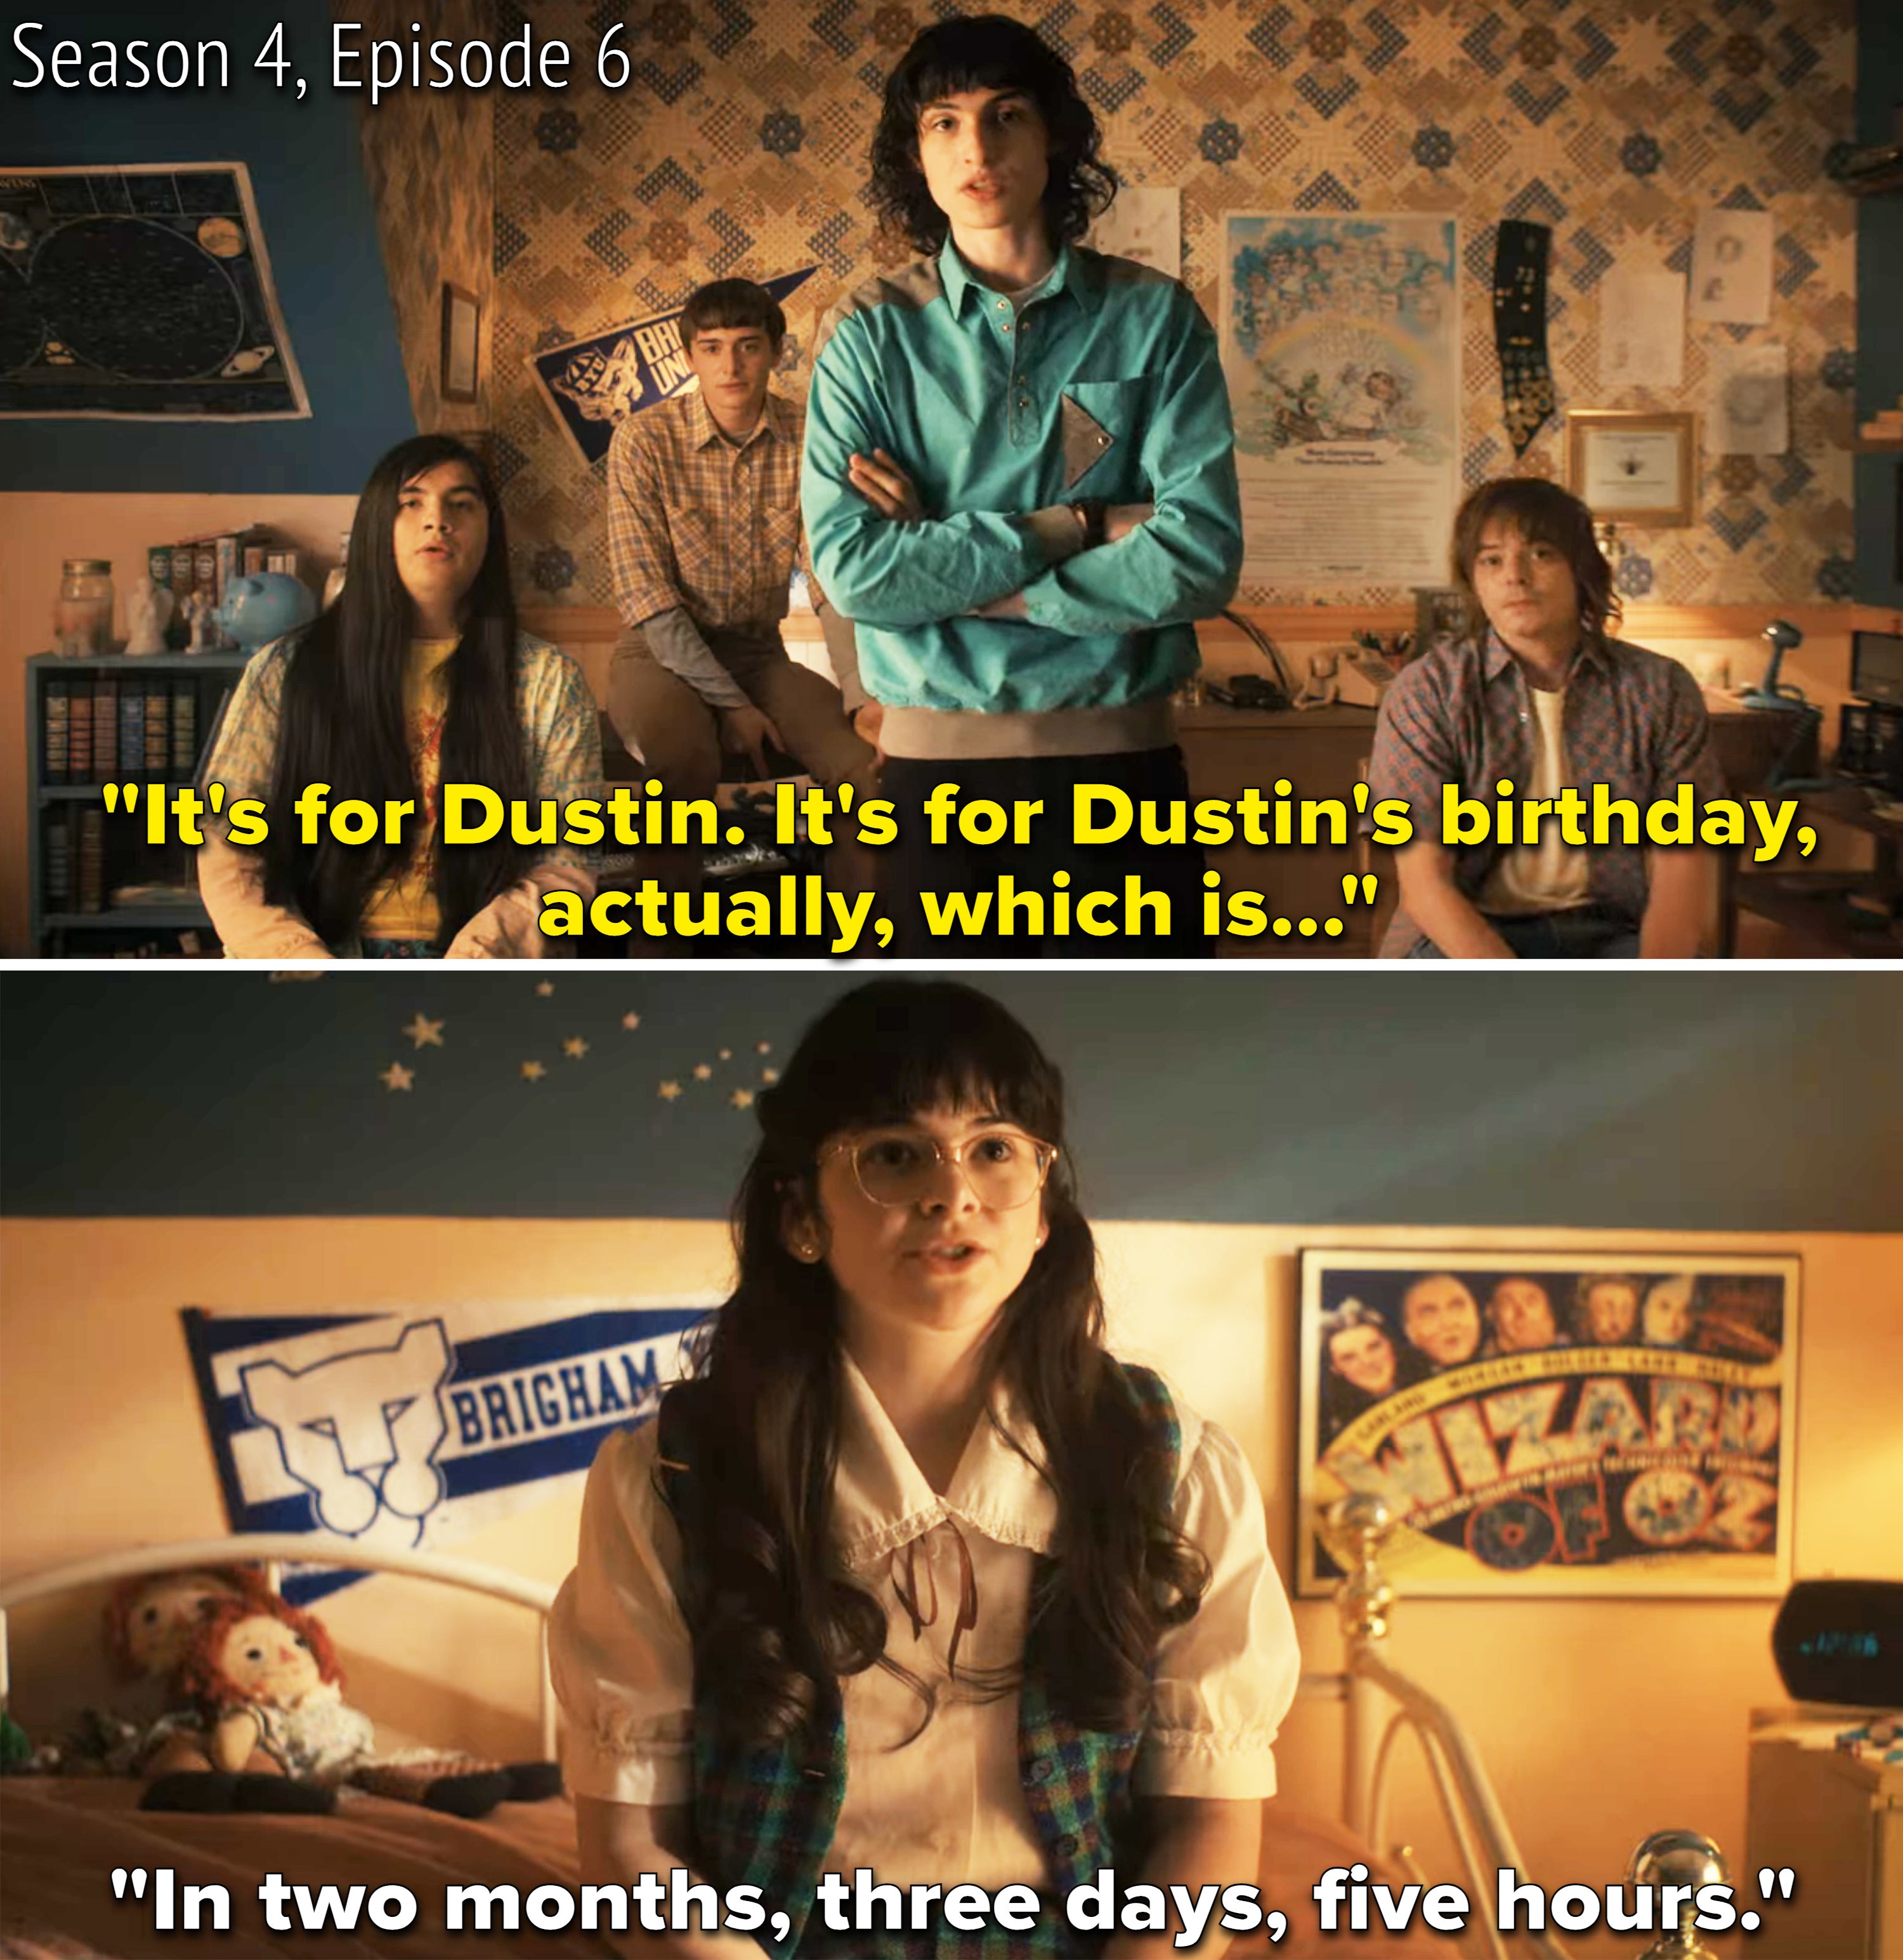 Mike referencing Dustin&#x27;s birthday, which another character says is in two months, three days, and five hours